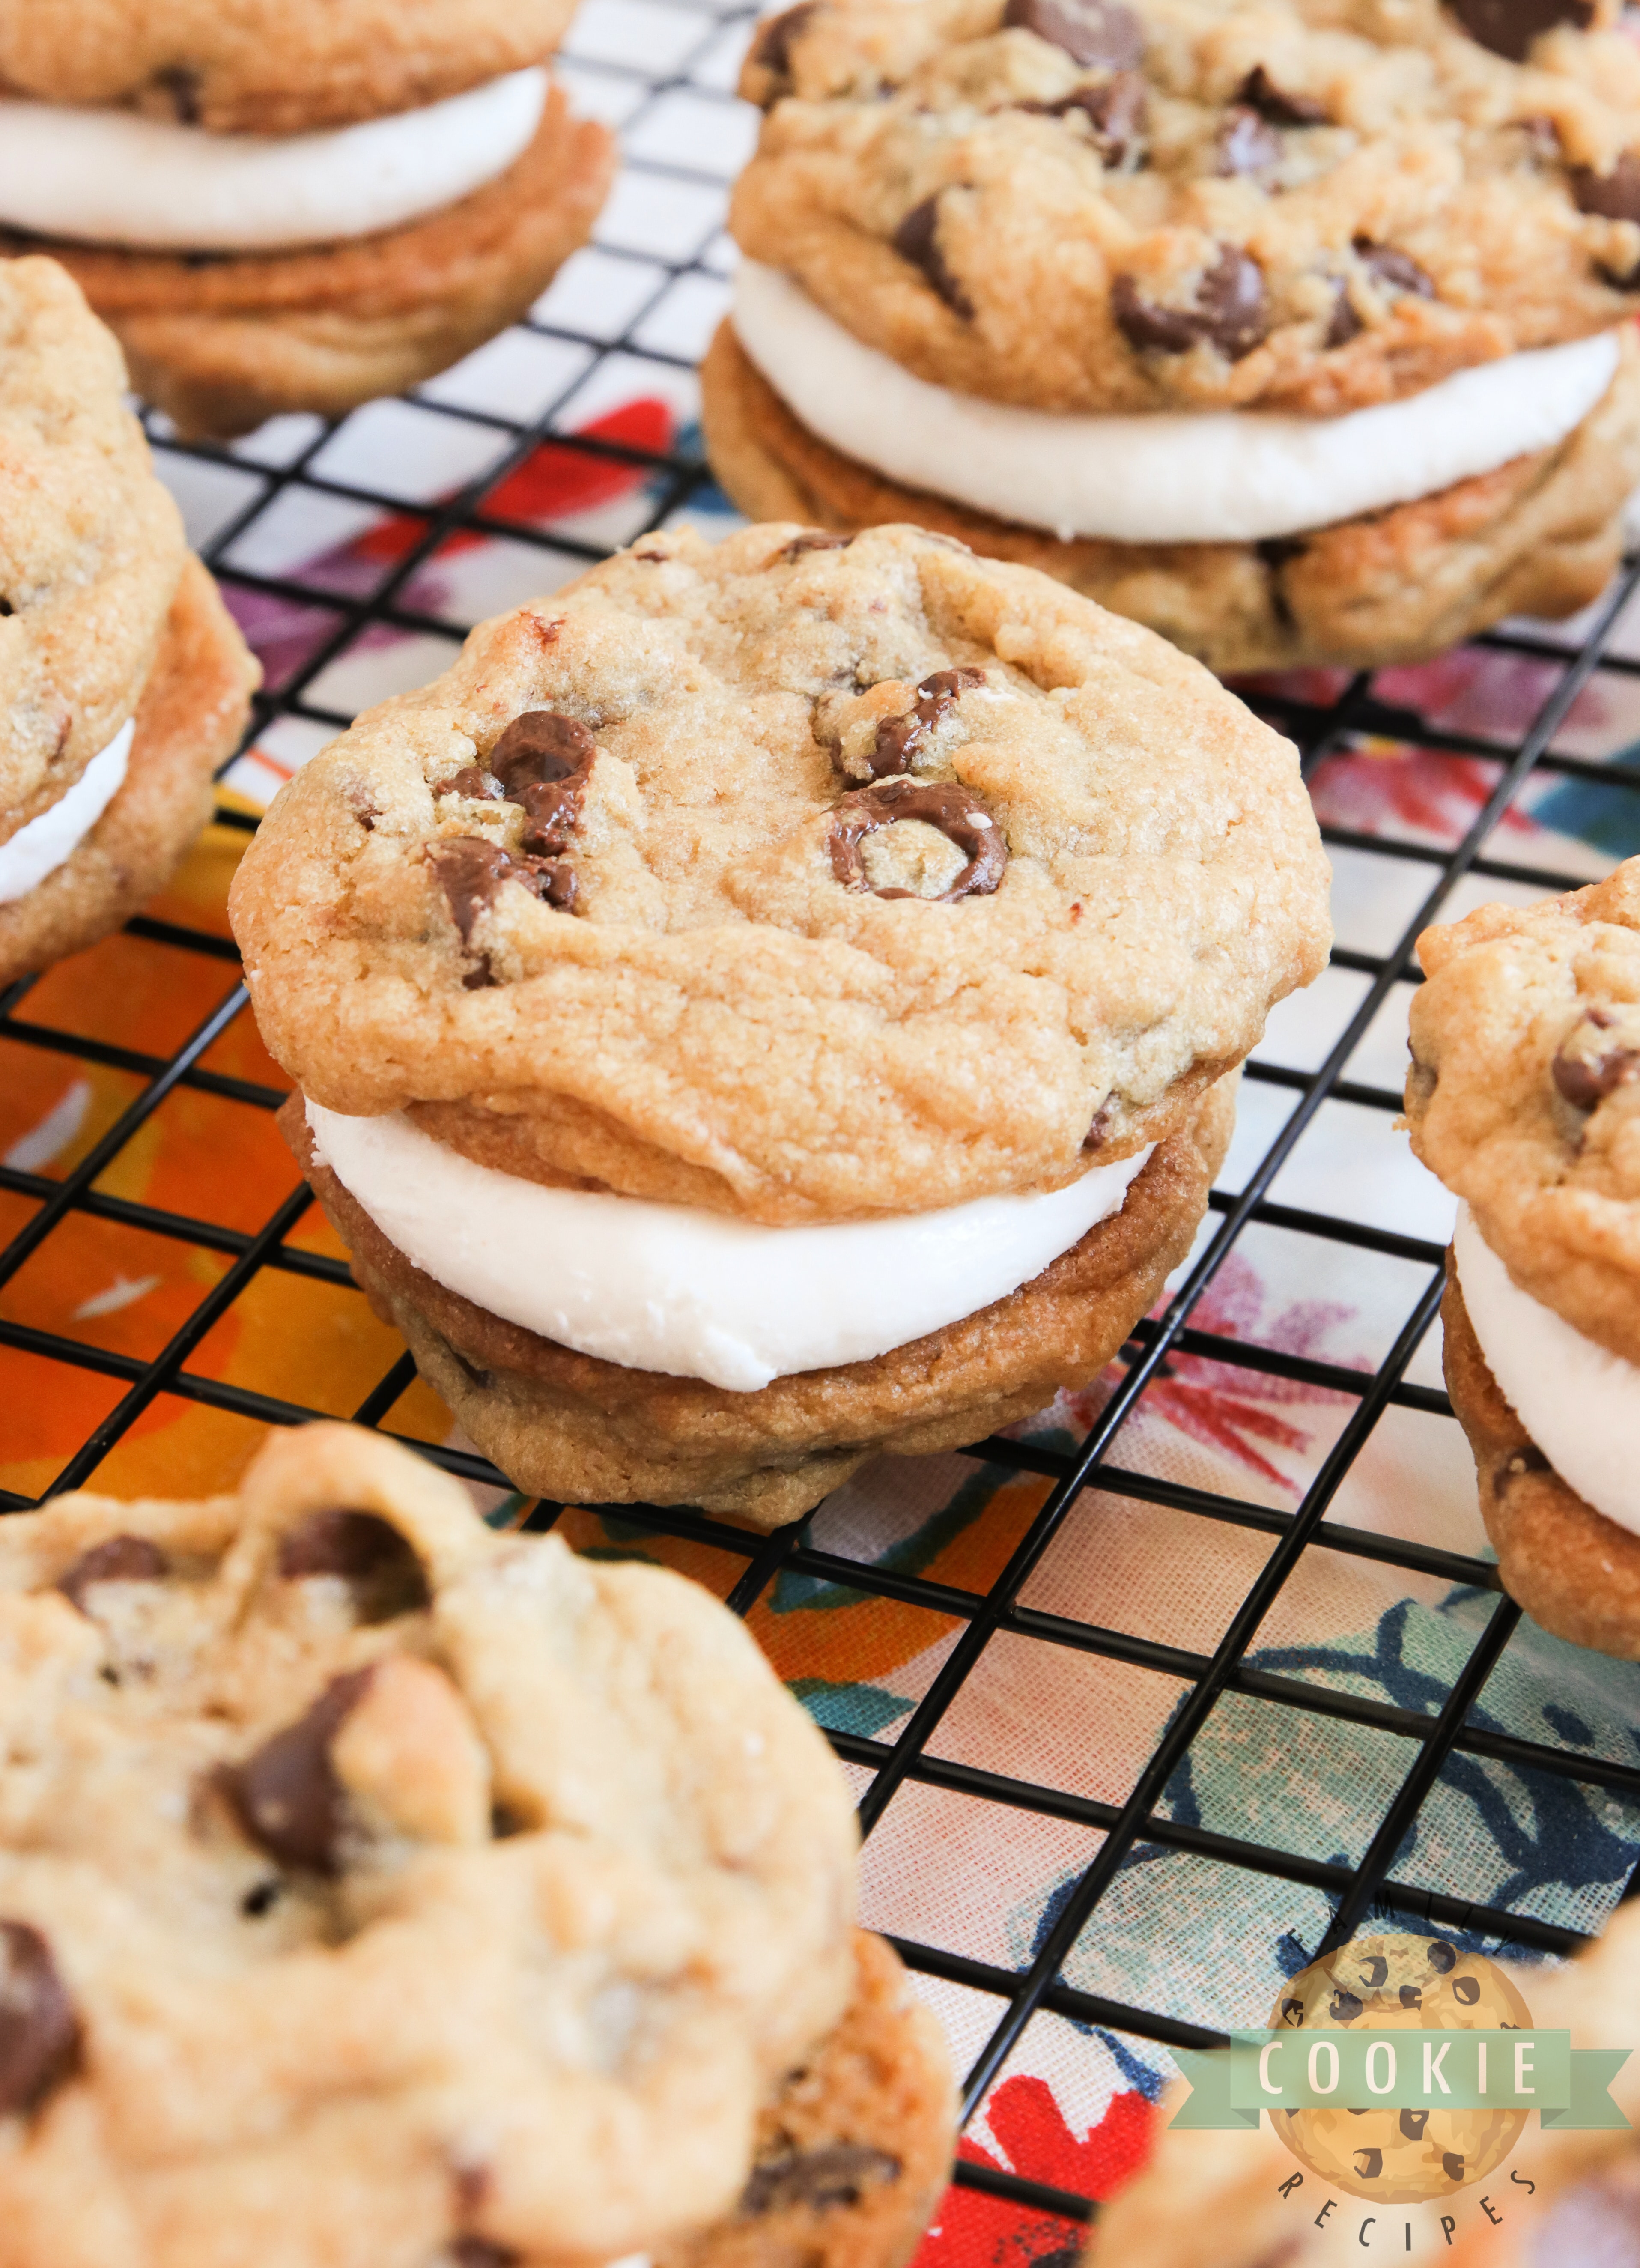 S'mores Cookie Sandwiches are made with graham cracker chocolate chip cookies and a simple marshmallow filling. Even if you don't love s'mores, you will love these cookie sandwiches!